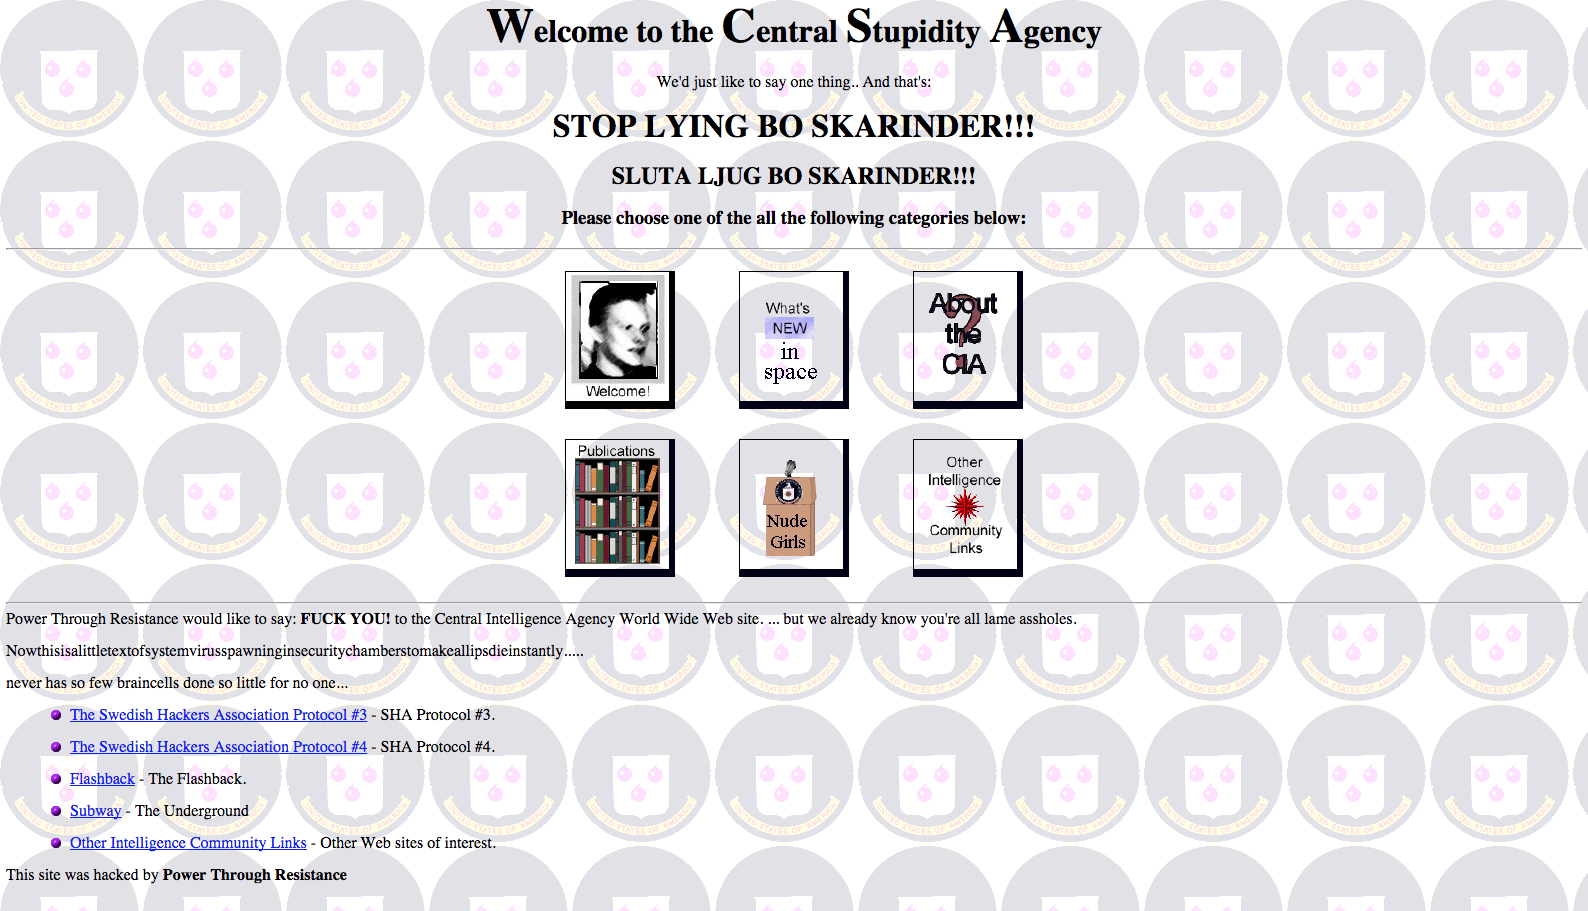 That Time Hackers Changed The CIA Website To ‘Central Stupidity Agency’